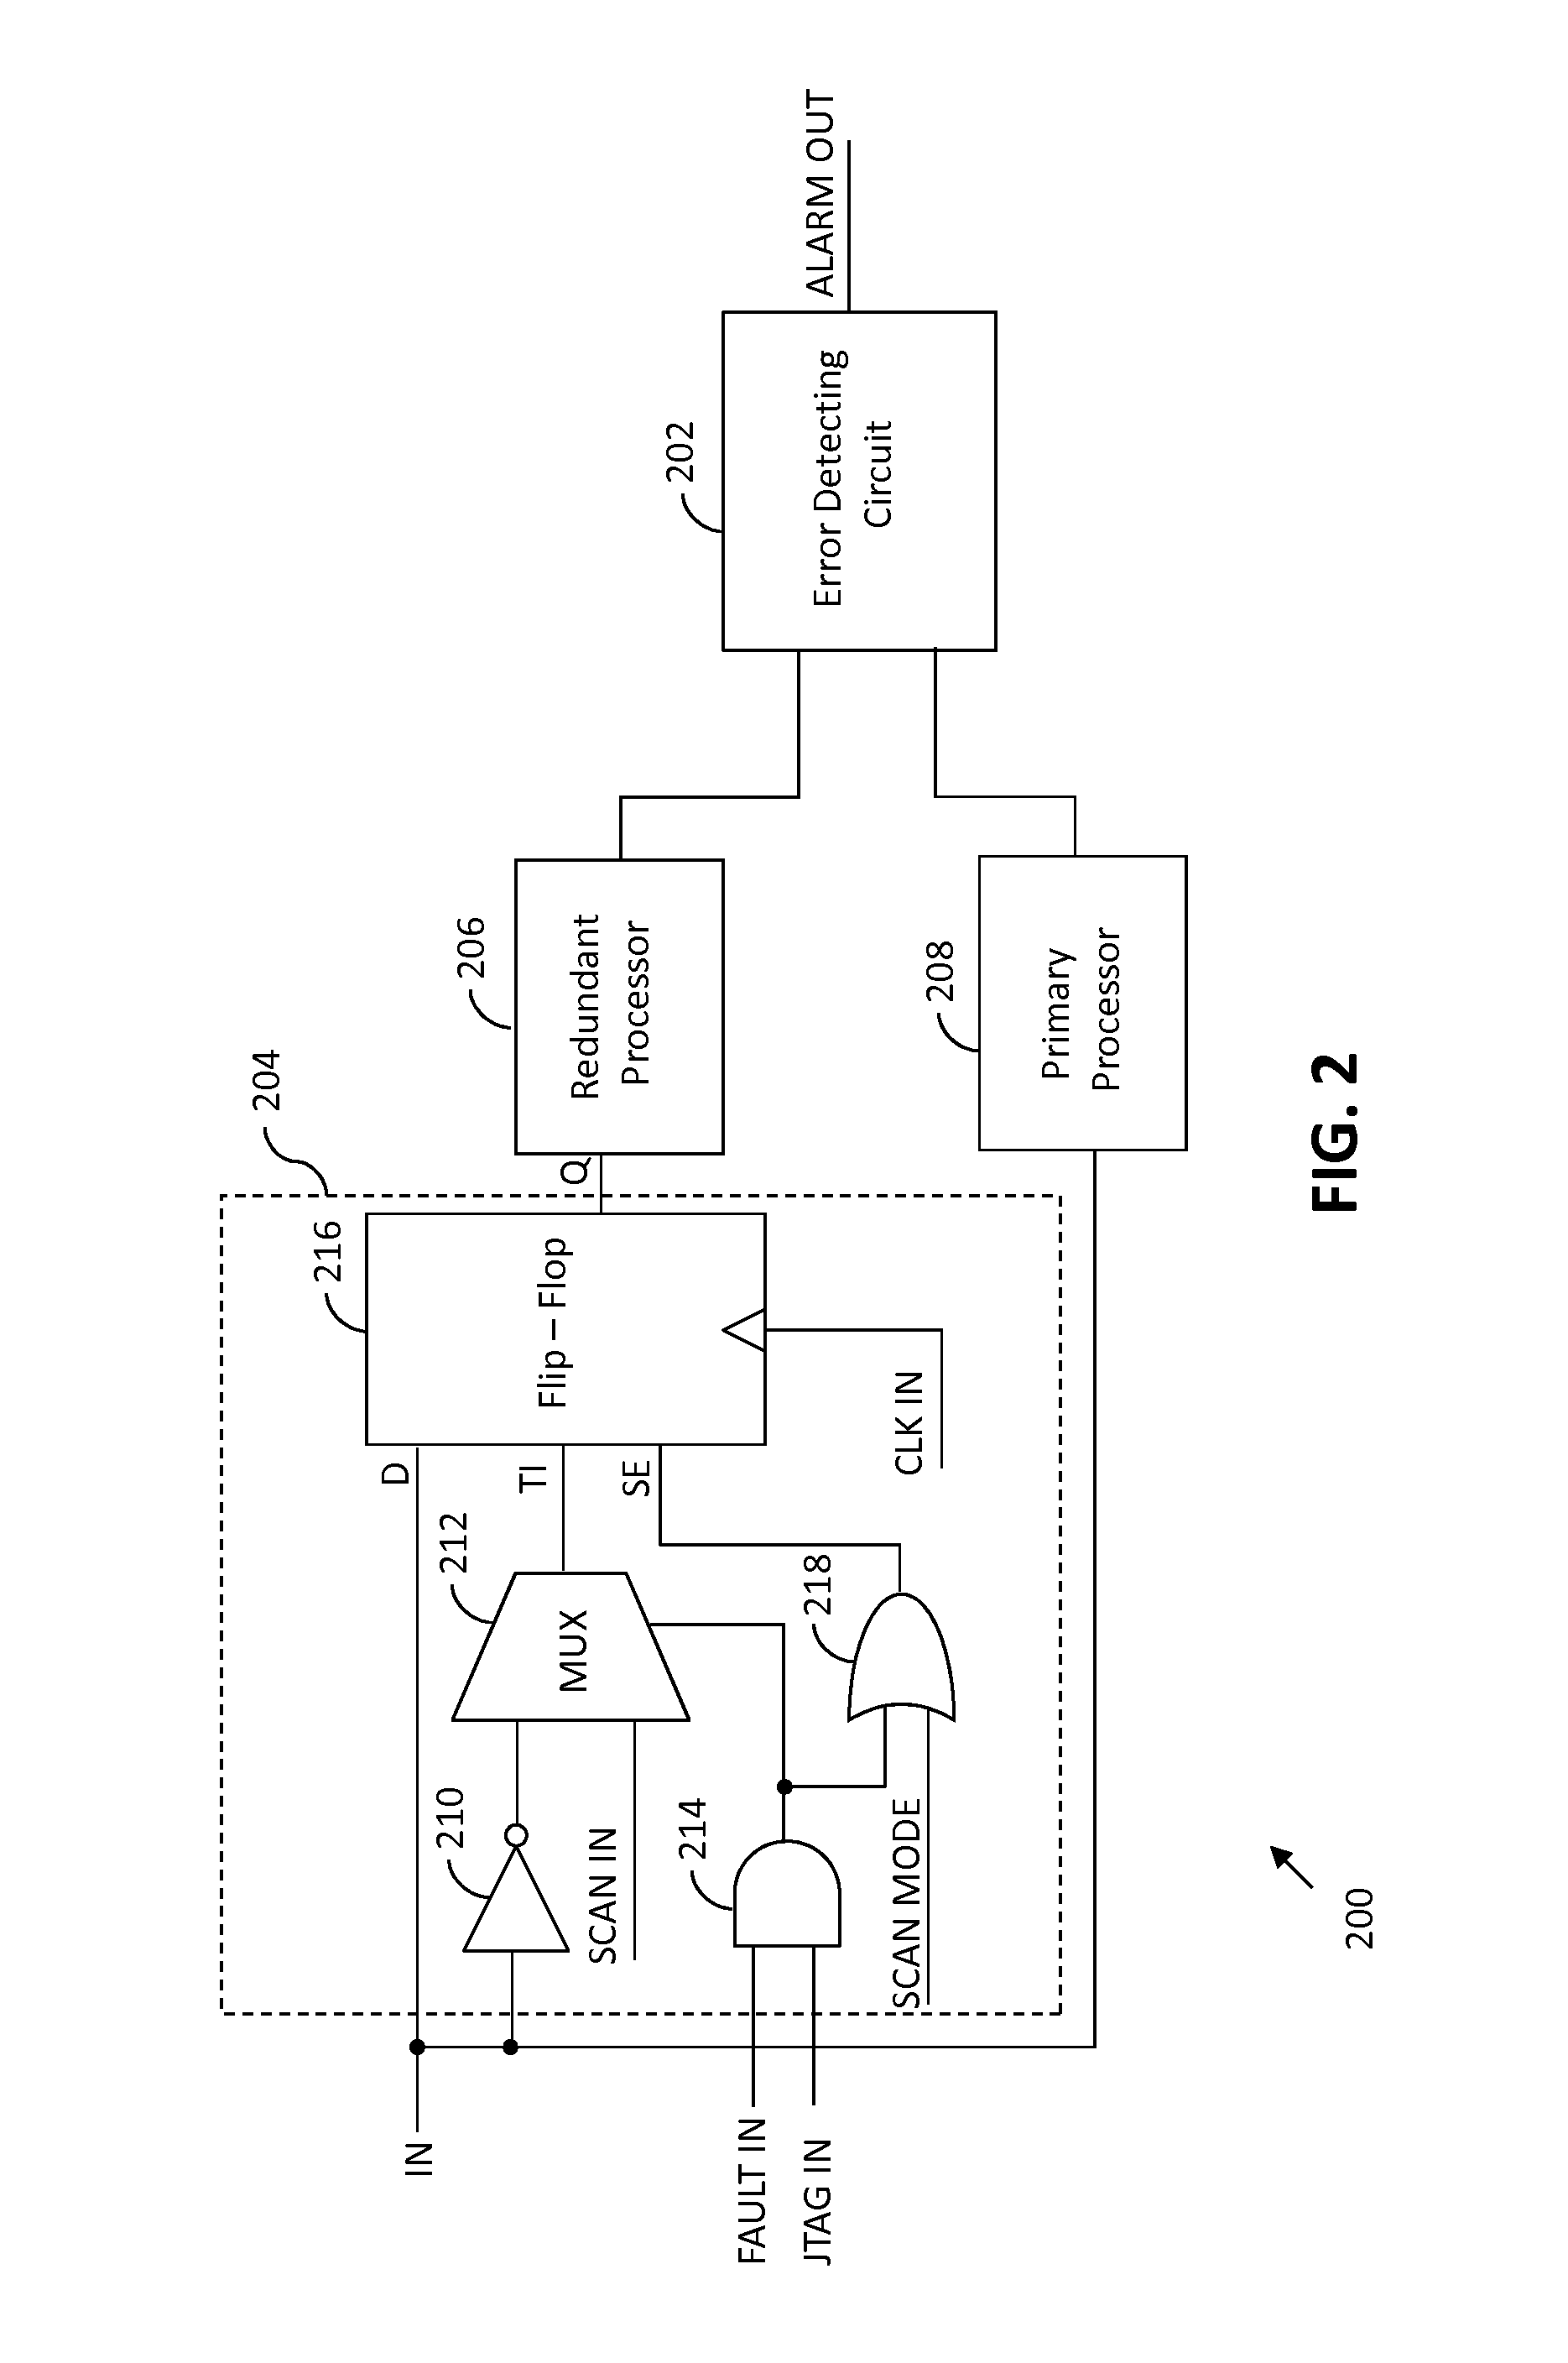 System for testing error detection circuits